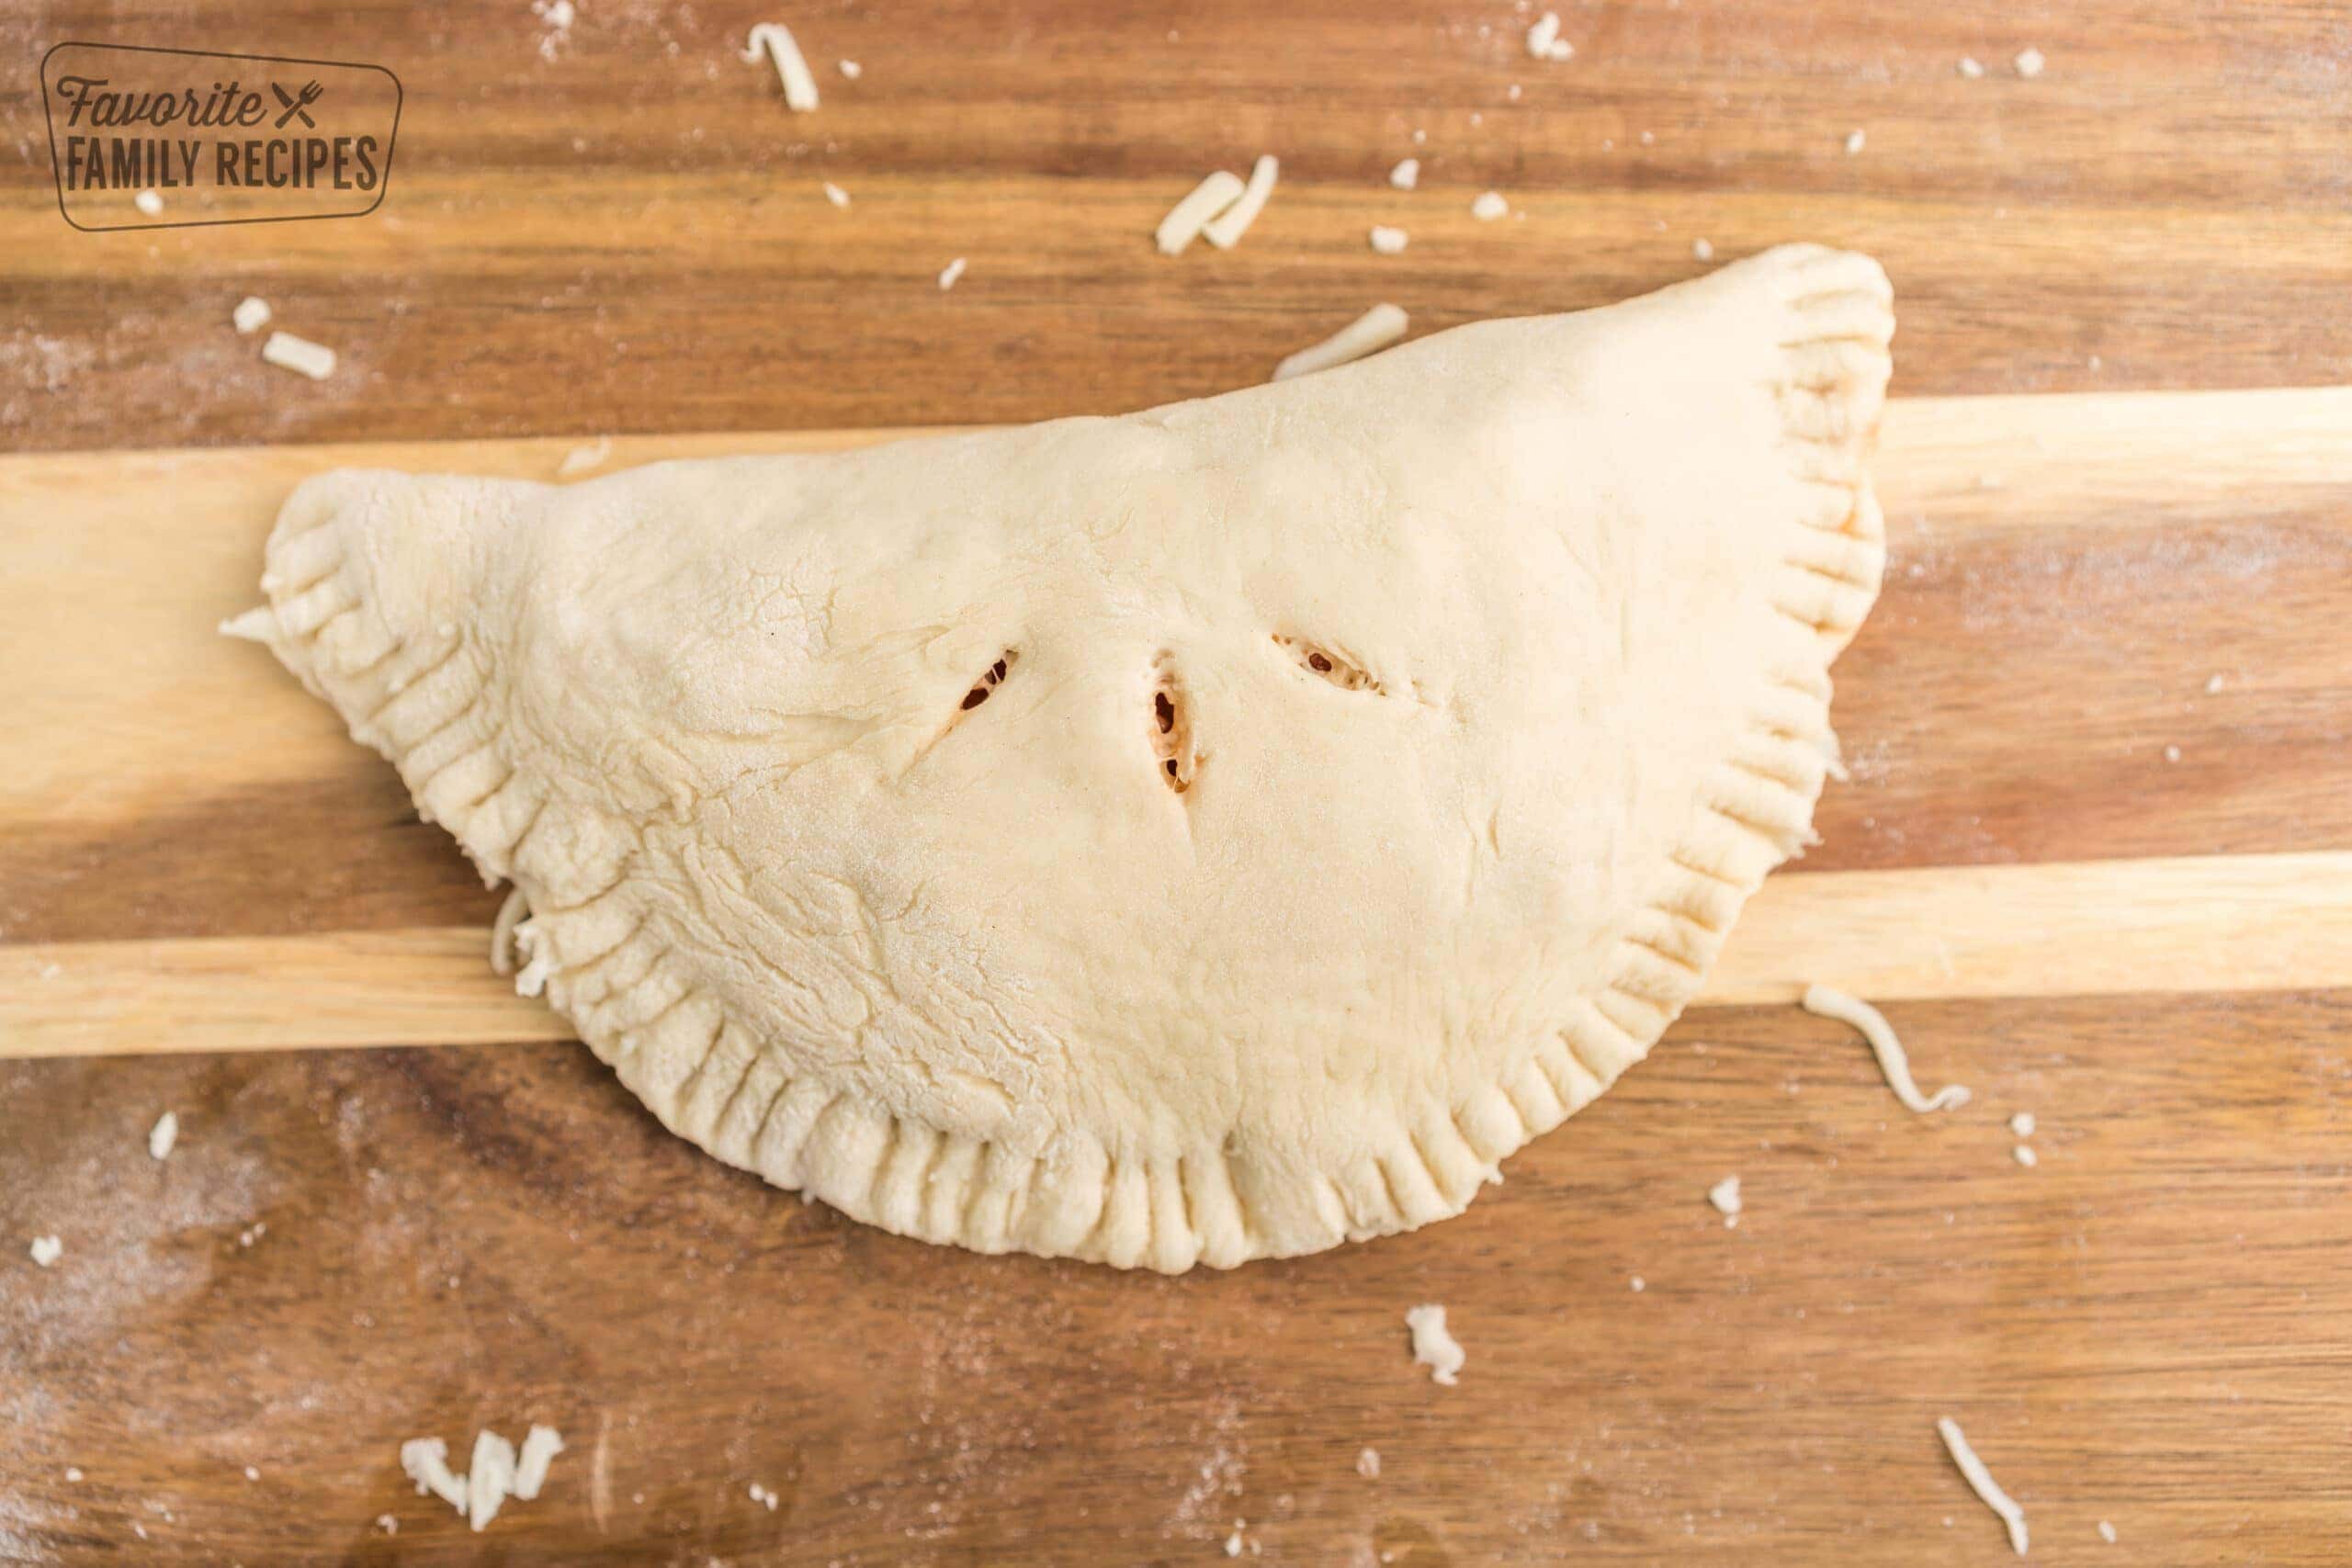 An uncooked calzone on a cutting board